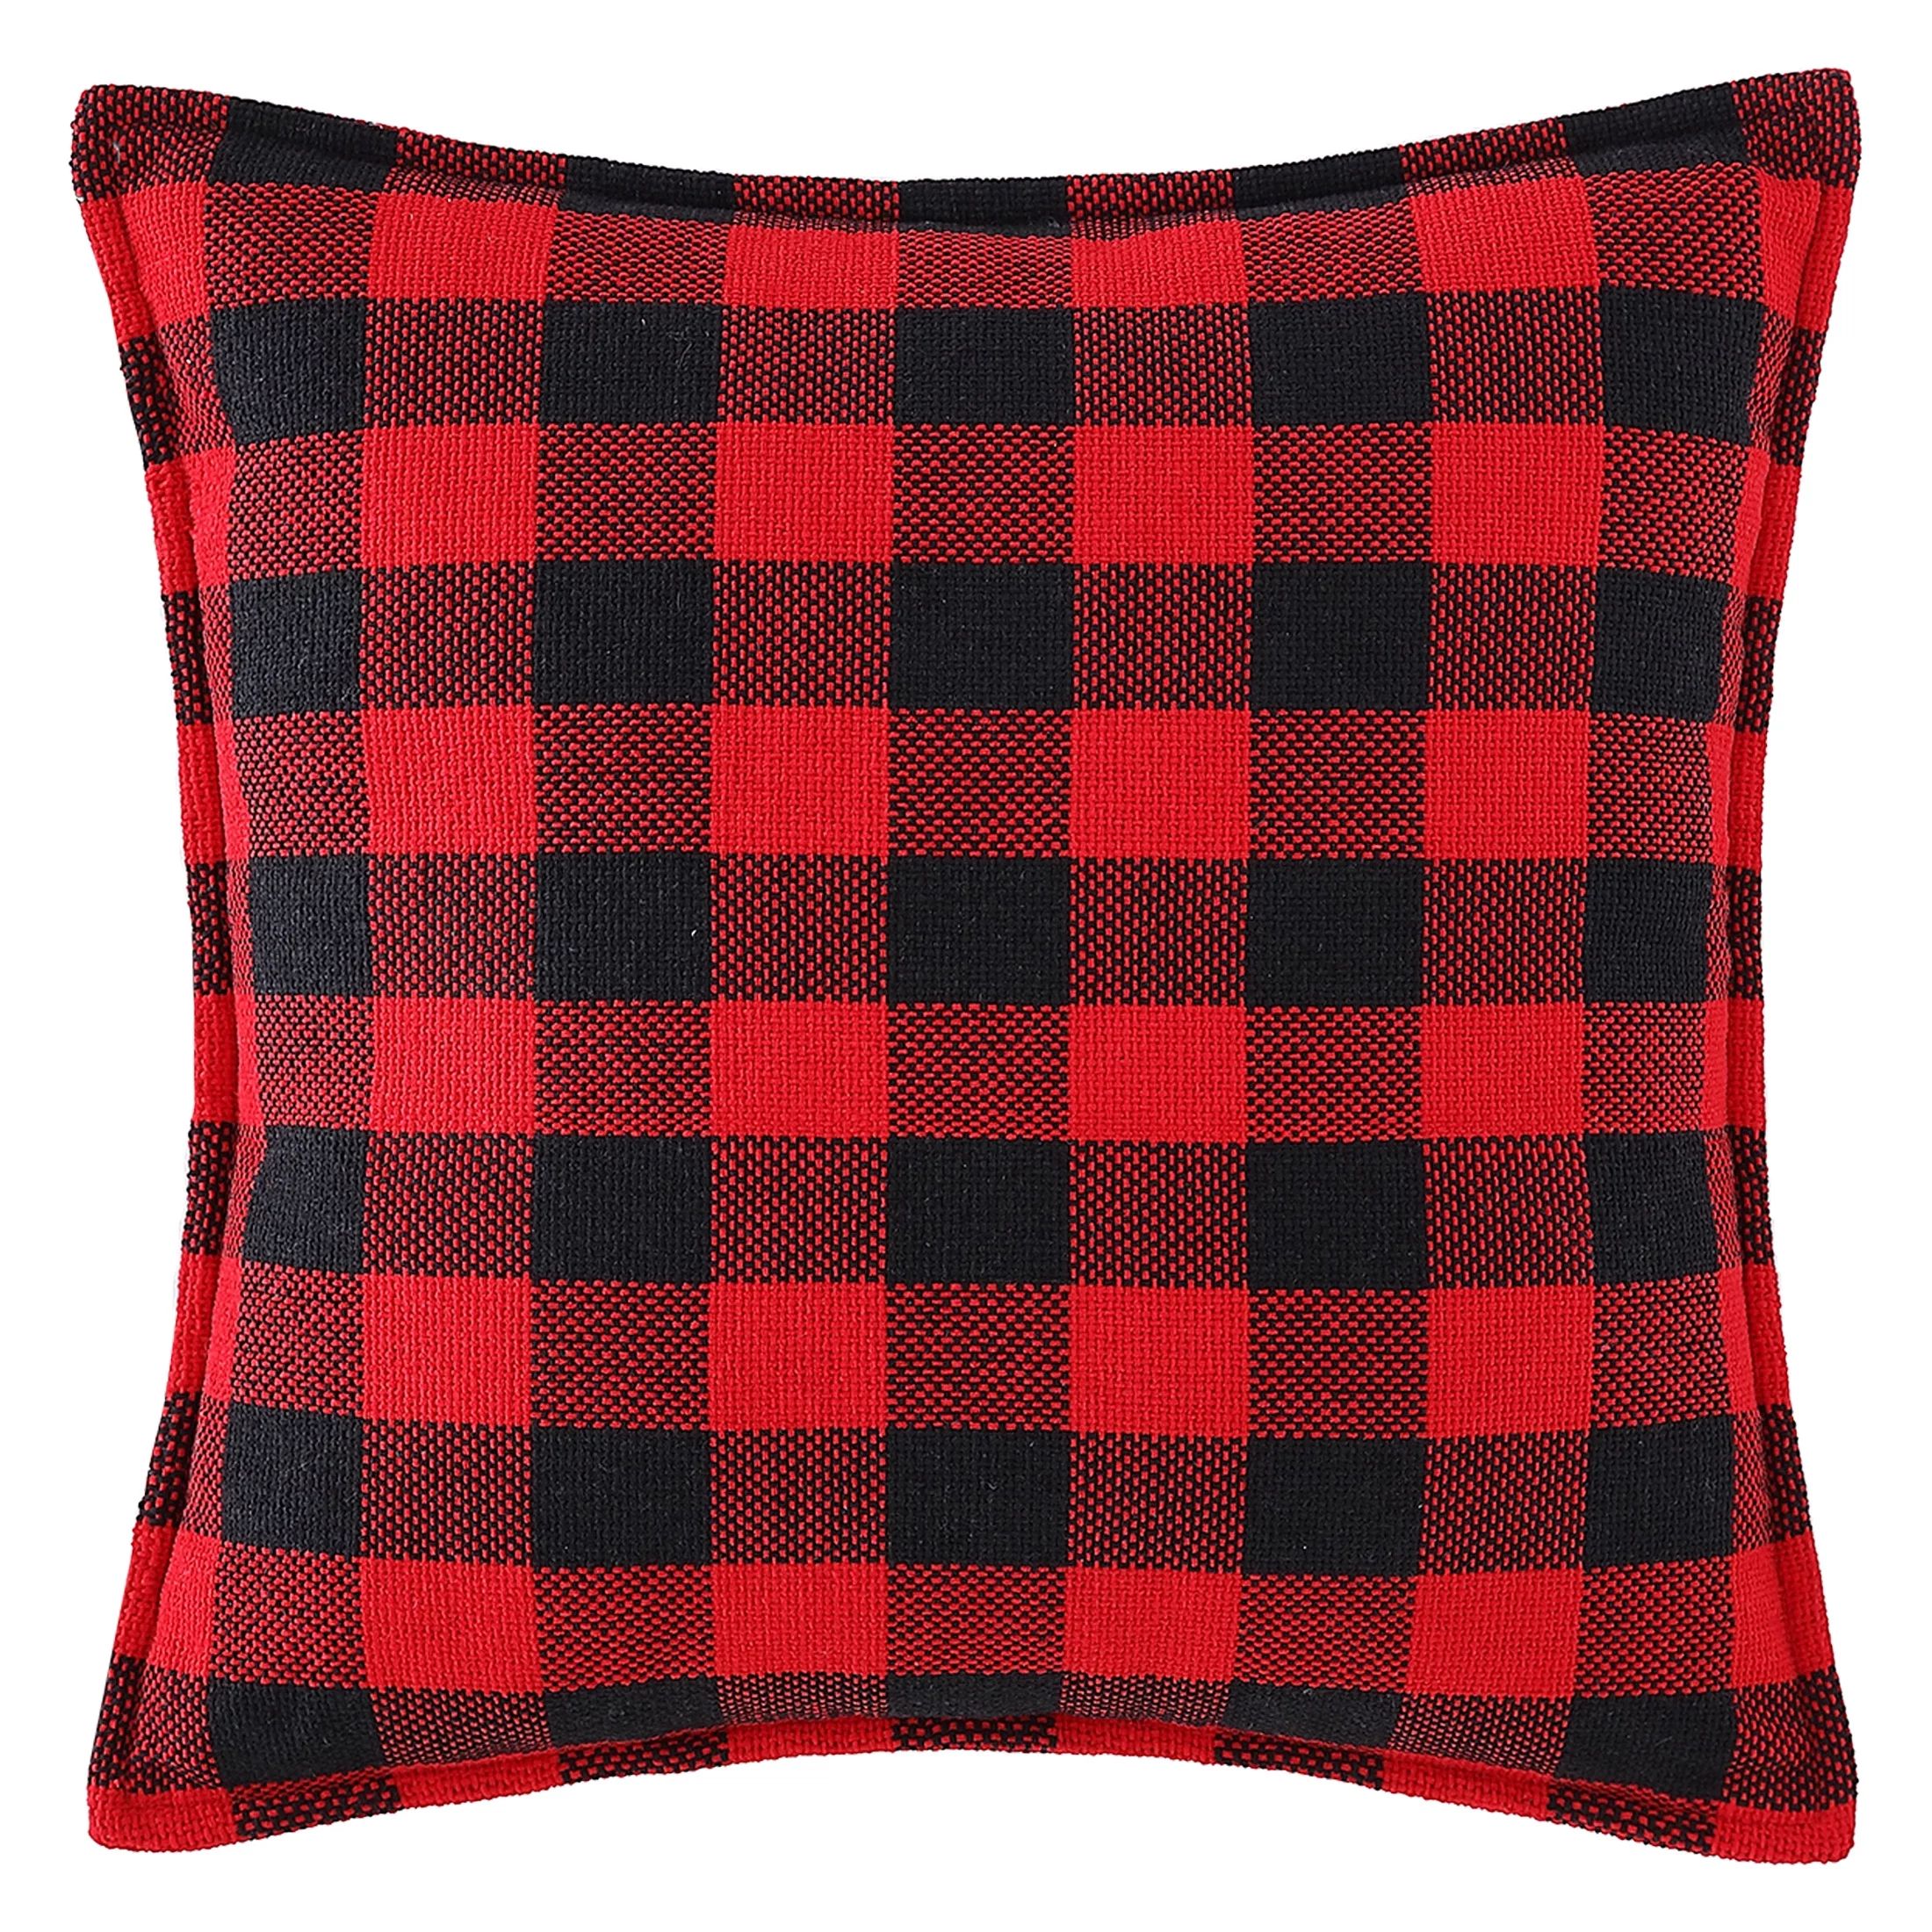 Mainstays, Red Plaid Decorative Throw Pillow, Red, 18" x 18", Square, 1 Pack | Walmart (US)